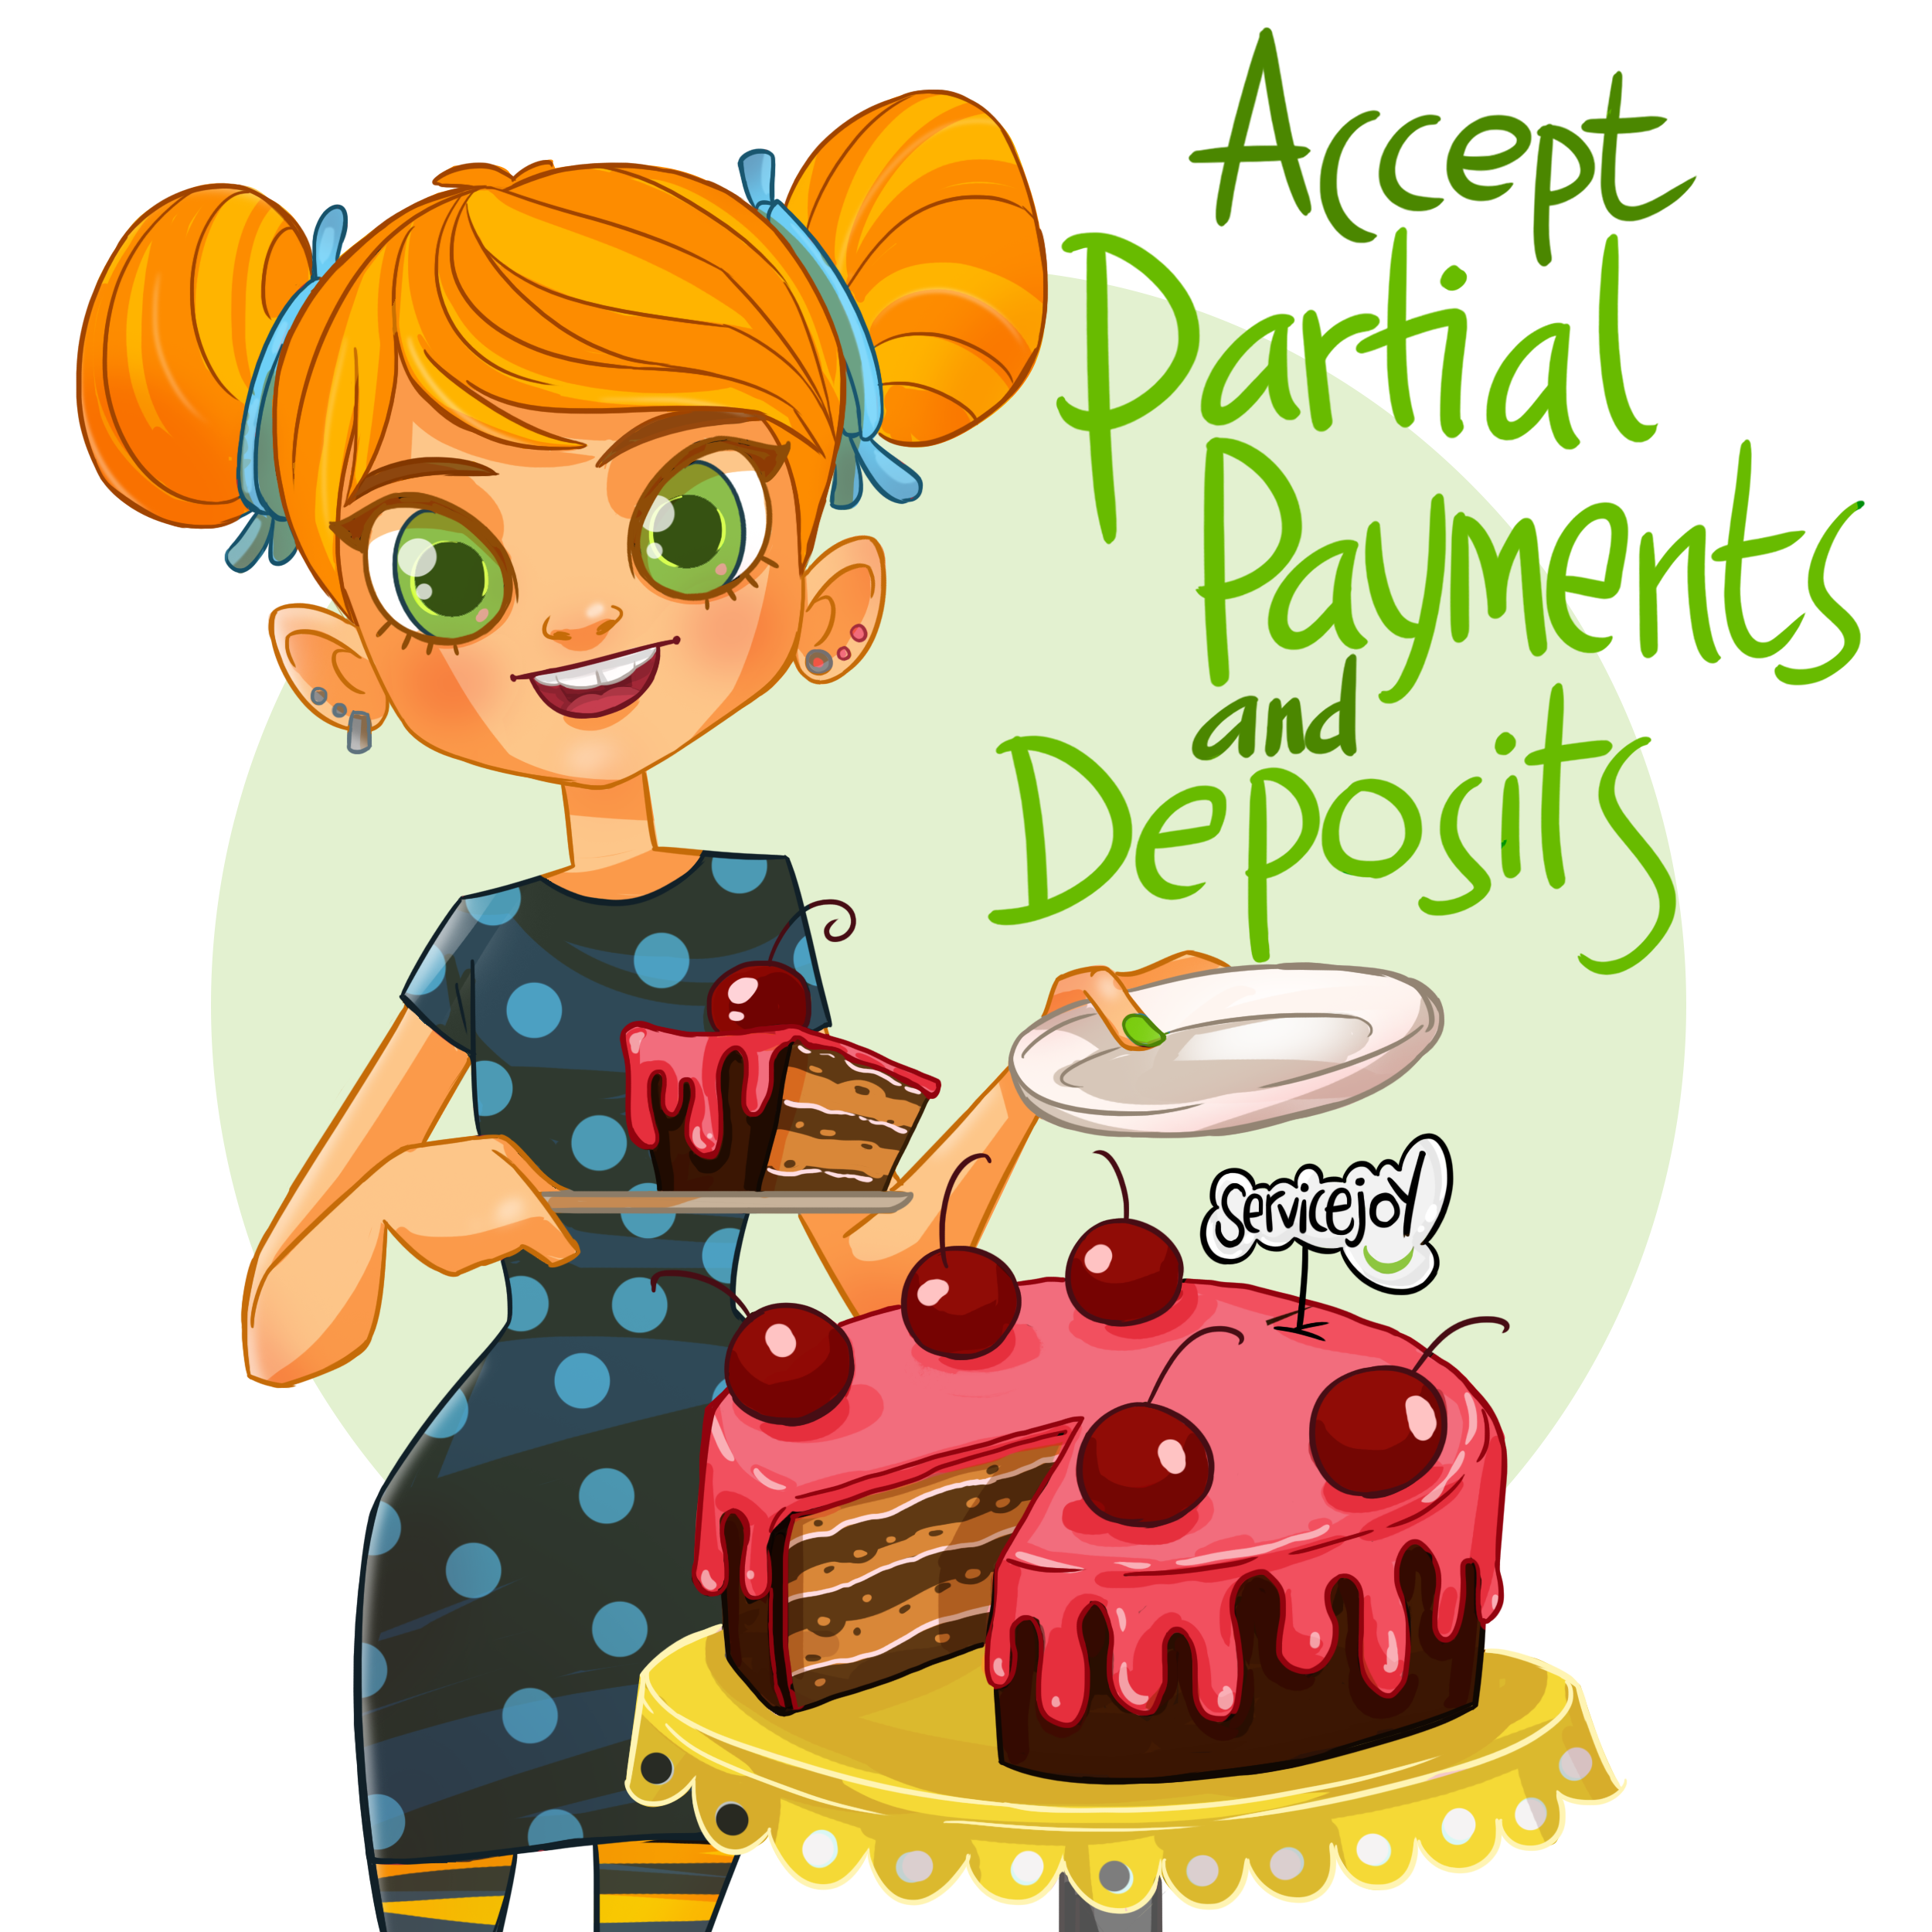 Partial Payments and Deposits Online Invoice Software